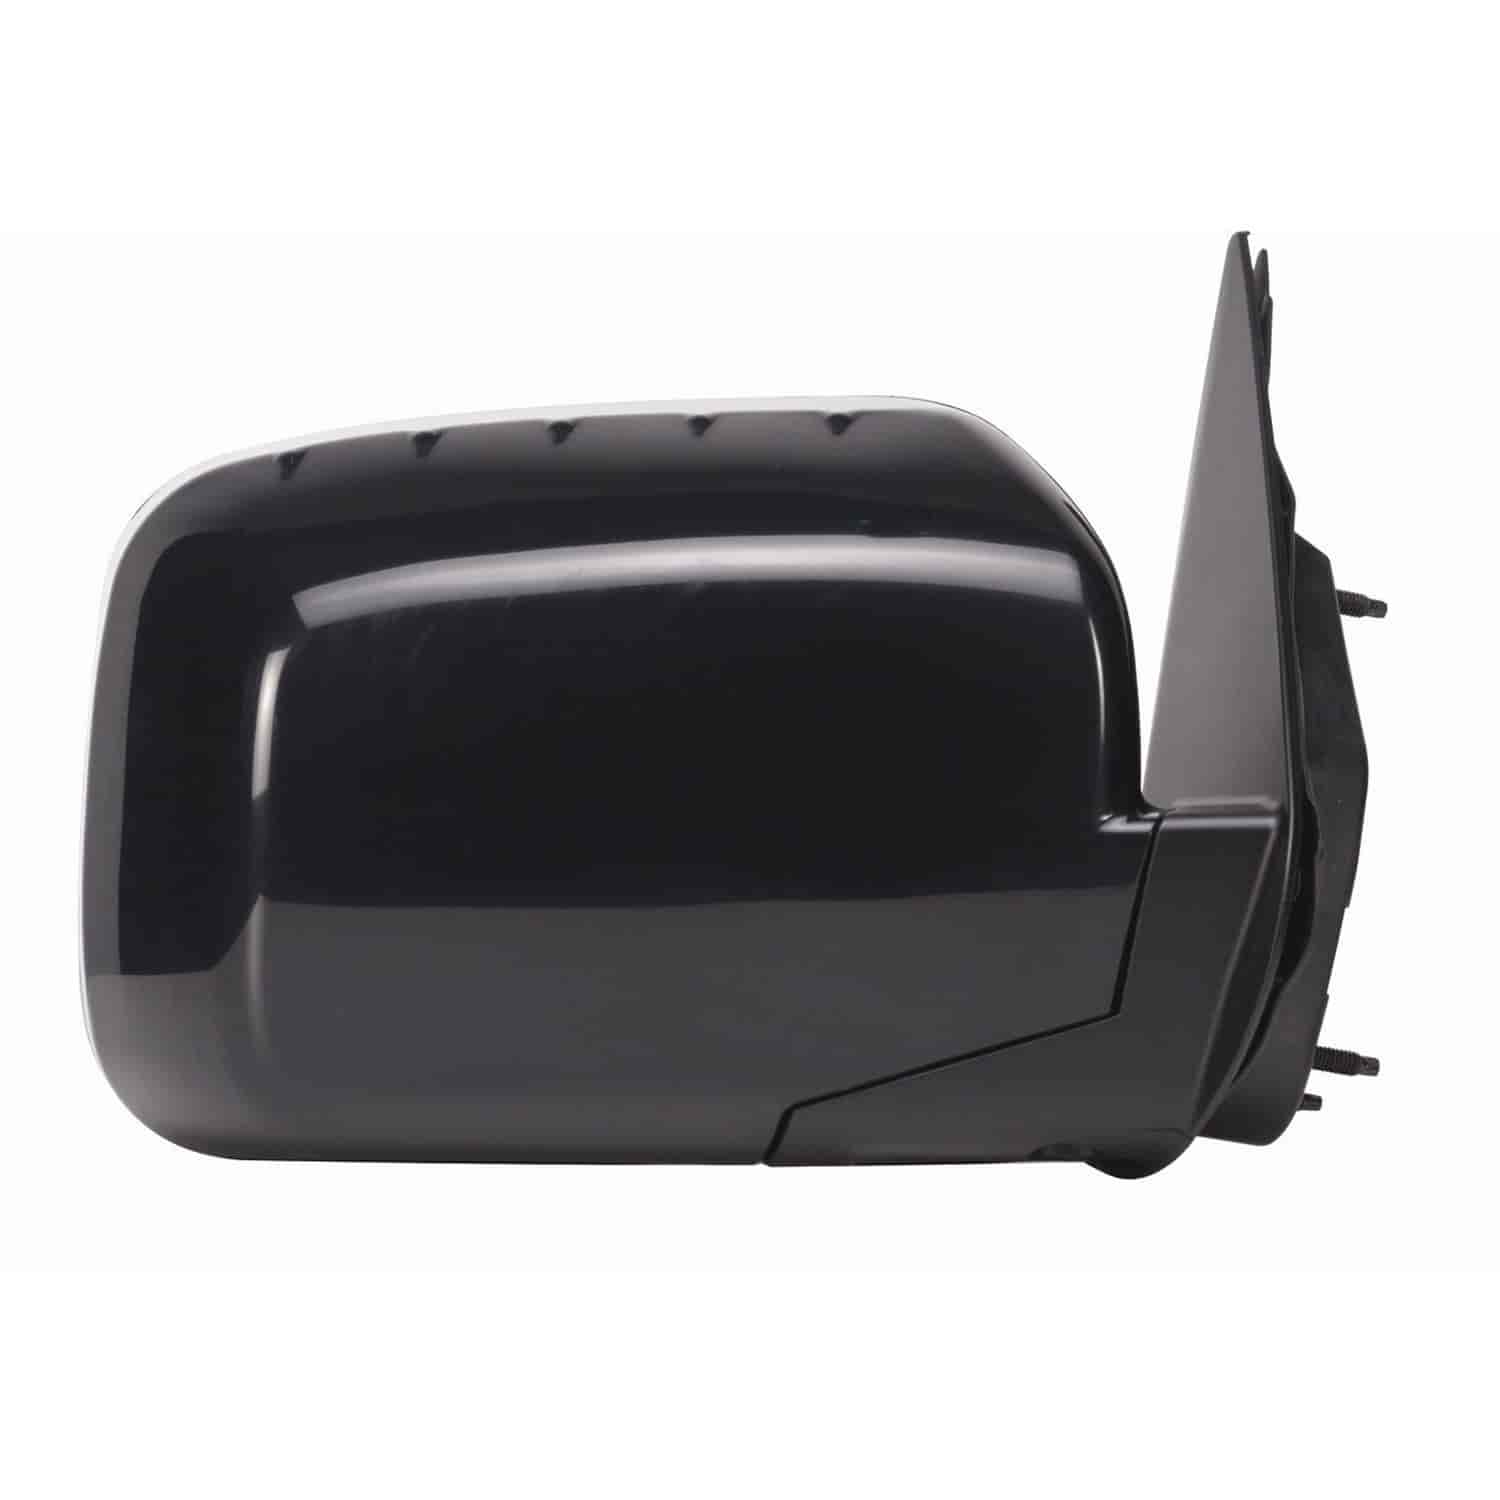 OEM Style Replacement mirror for 06-14 Honda Ridgeline passenger side mirror tested to fit and funct